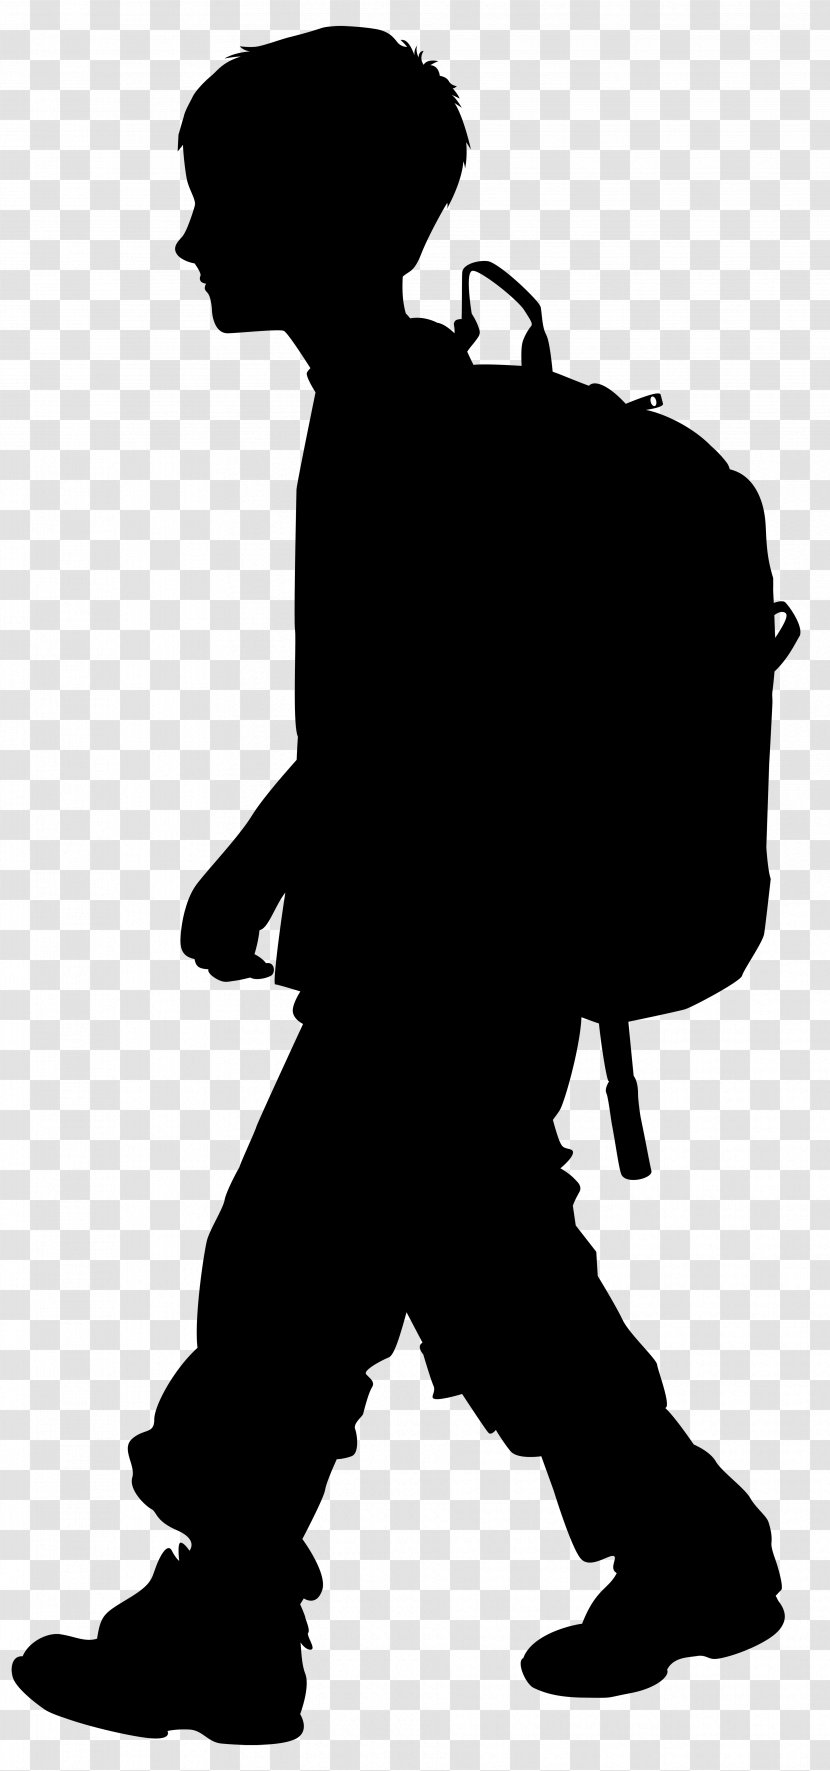 Silhouette Clip Art - Human Behavior - Boy With Backpack Image Transparent PNG